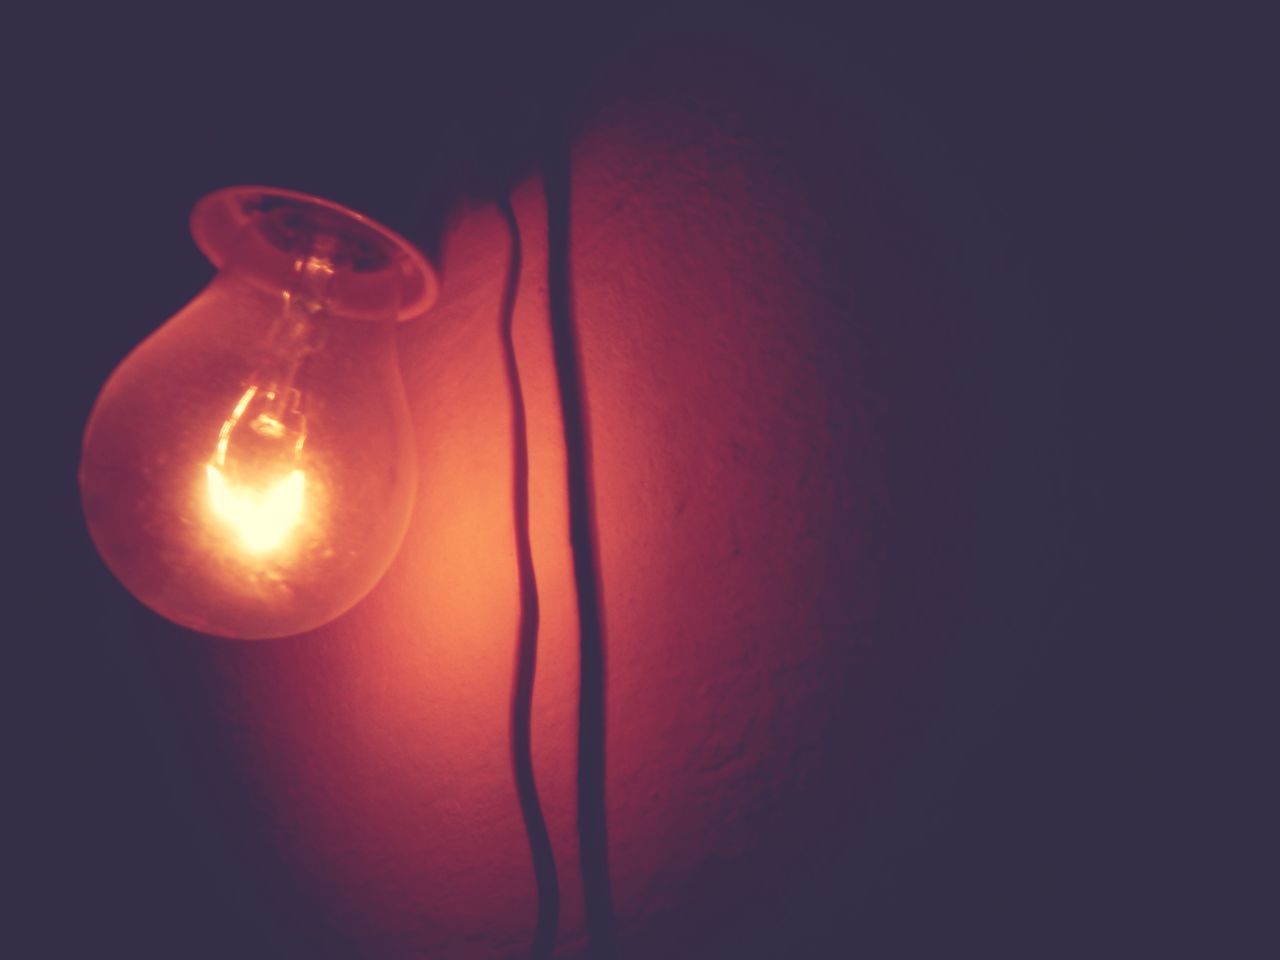 electricity, light bulb, lighting equipment, illuminated, filament, indoors, glowing, light, darkness, red, no people, incandescent light bulb, studio shot, close-up, copy space, electric light, power generation, light - natural phenomenon, single object, technology, yellow, macro photography, circle, glass, dark, power supply, electric lamp, lighting